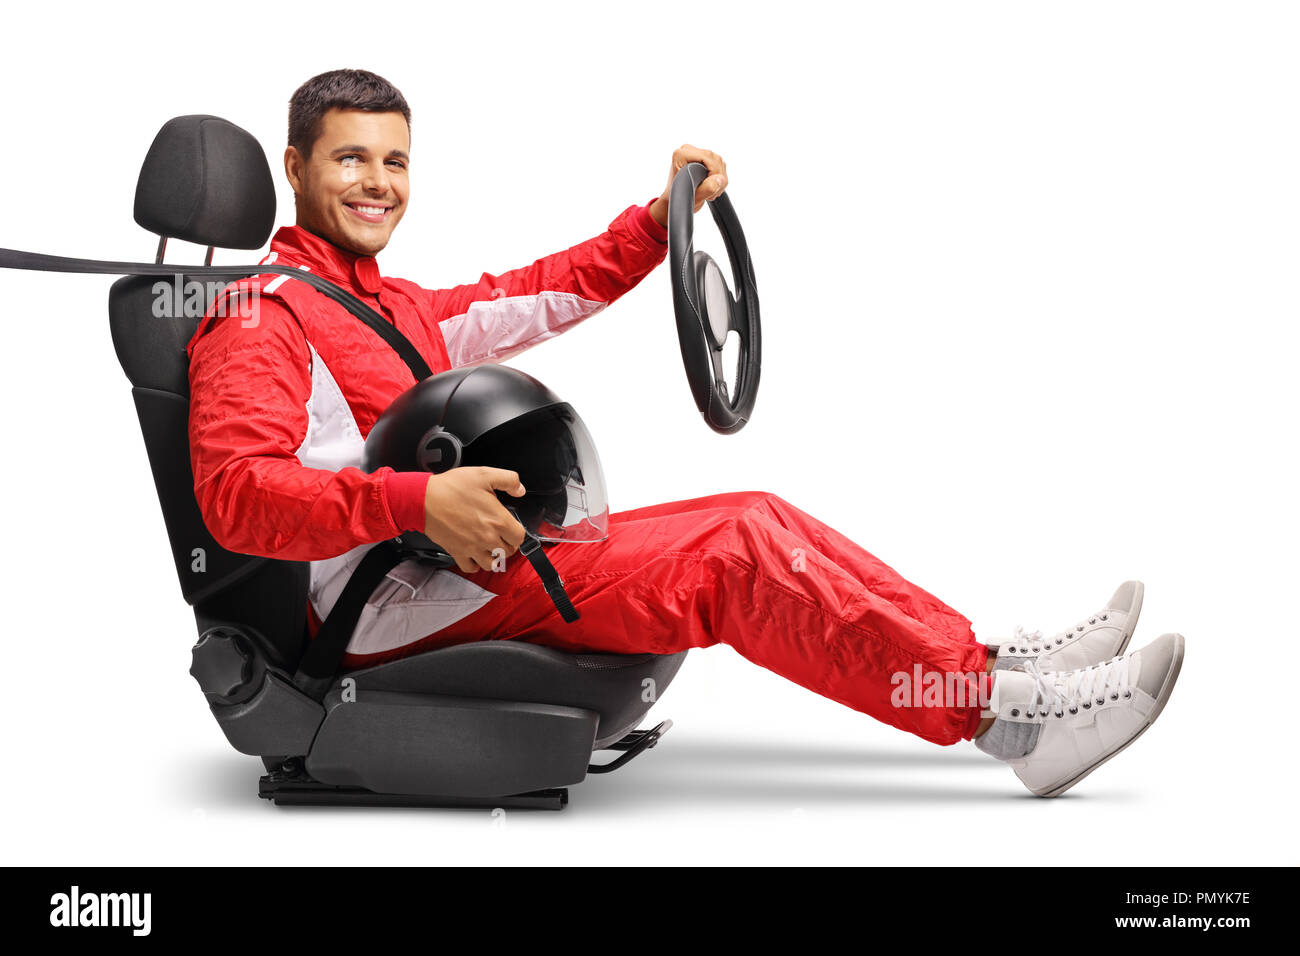 Racer in a car seat holding a wheel isolated on white background Stock Photo